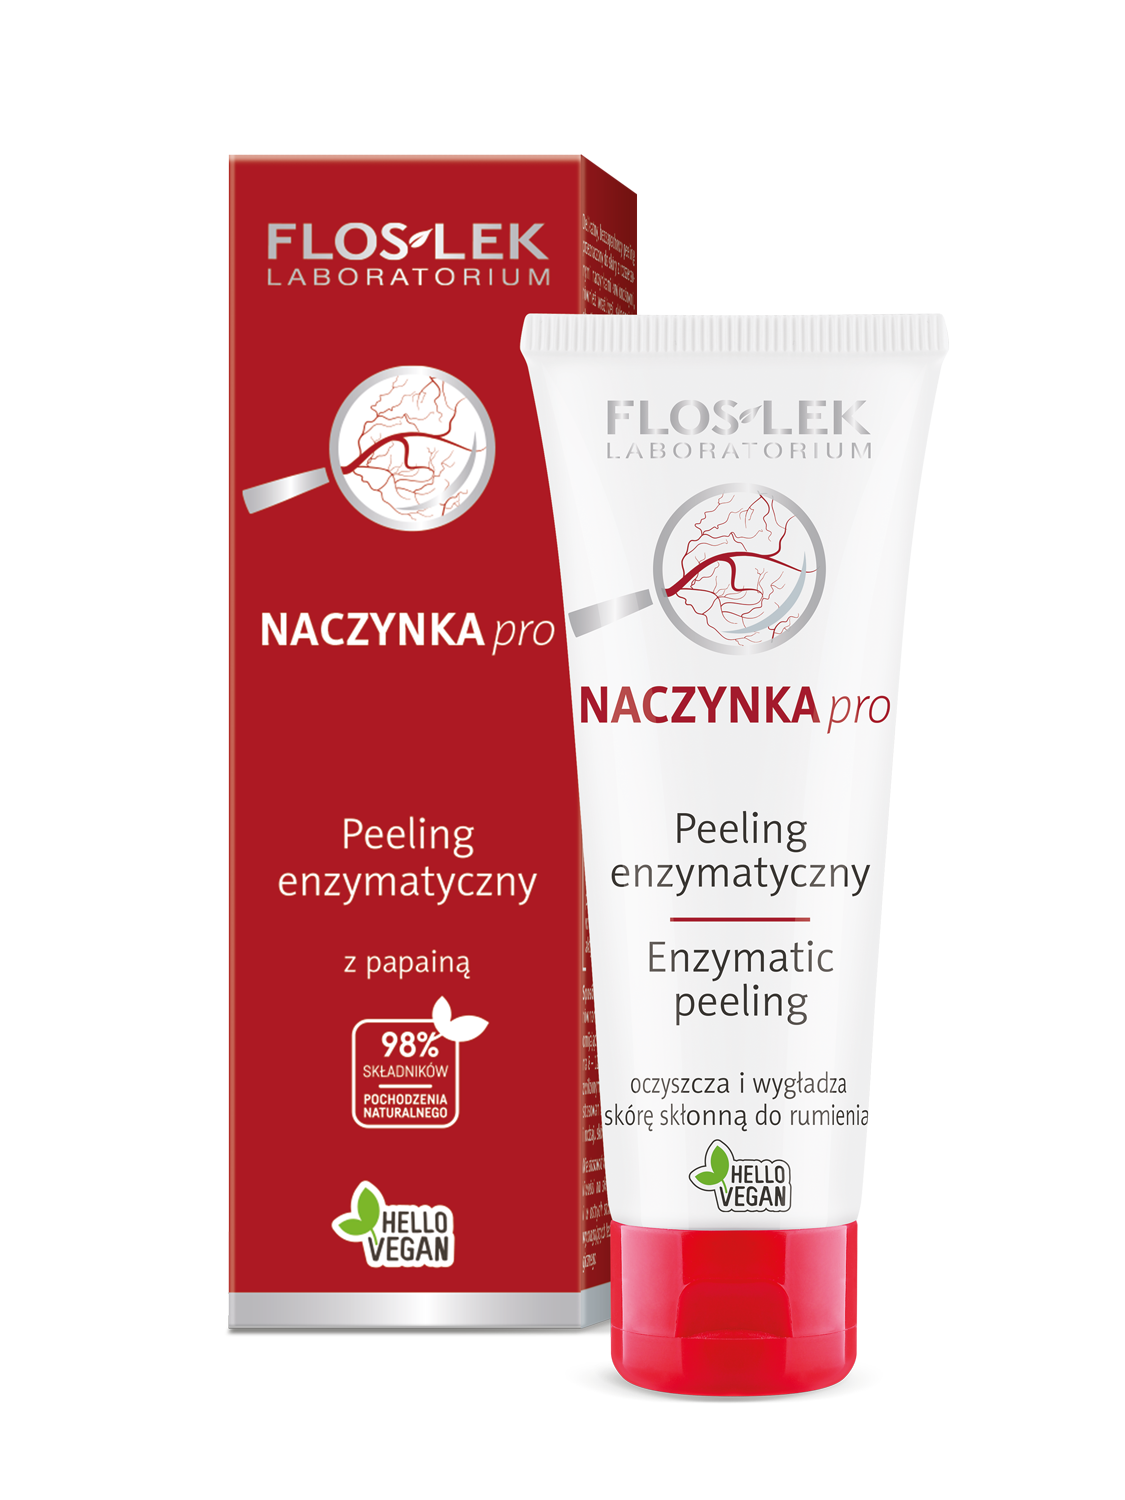 Smoothing and cleansing enzymatic peeling for sensitive and vascular skin Floslek NACNE pro